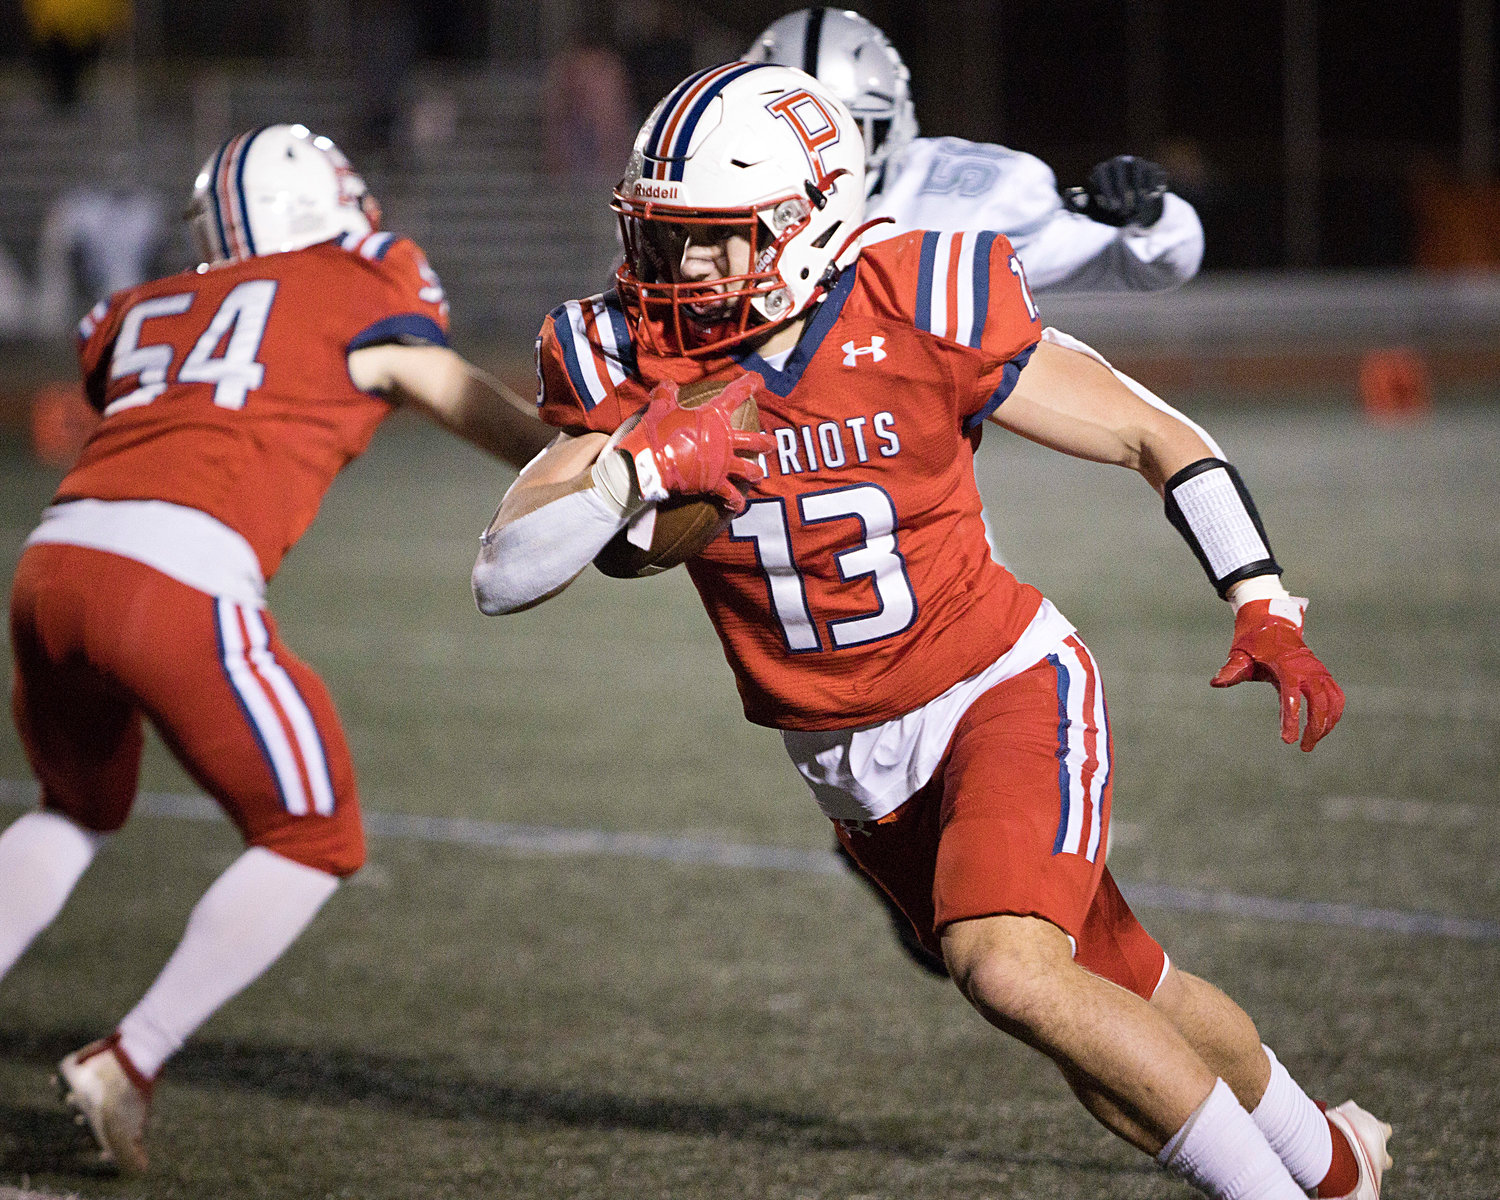 Portsmouth’s Evan Beese runs the ball wide to score a touchdown for the Patriots against Shea.